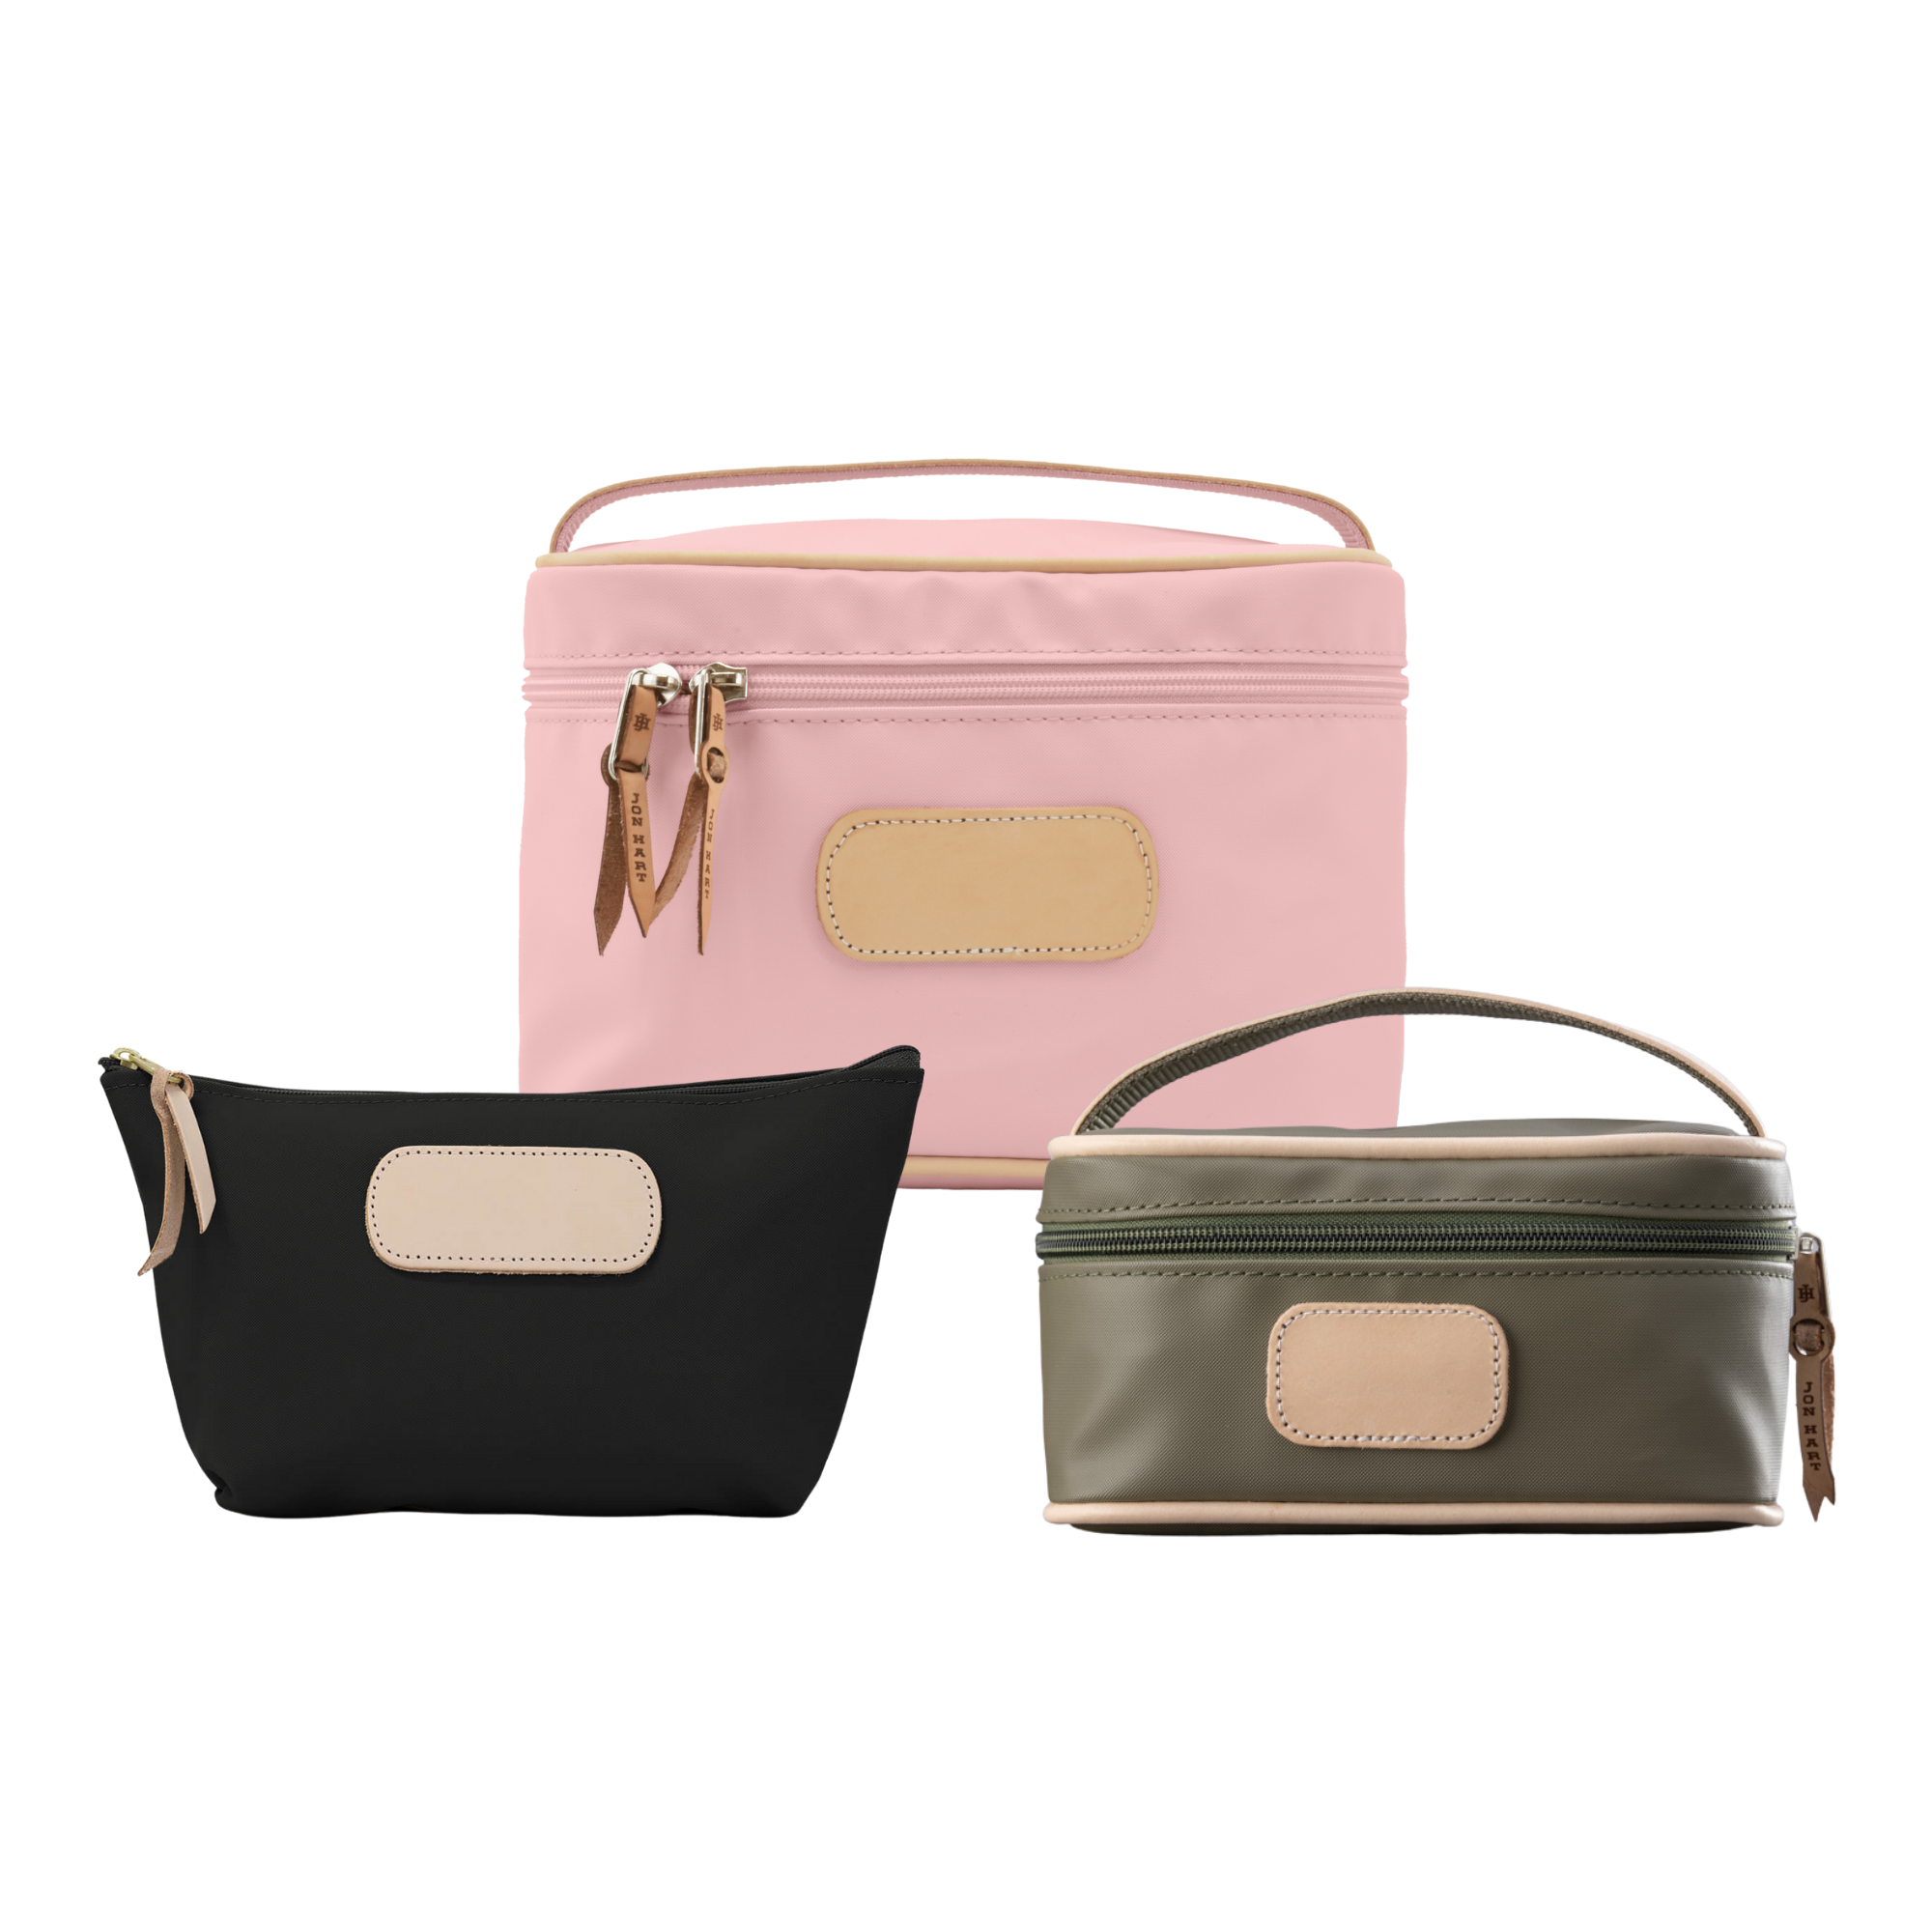 Cosmetic Travel Bags